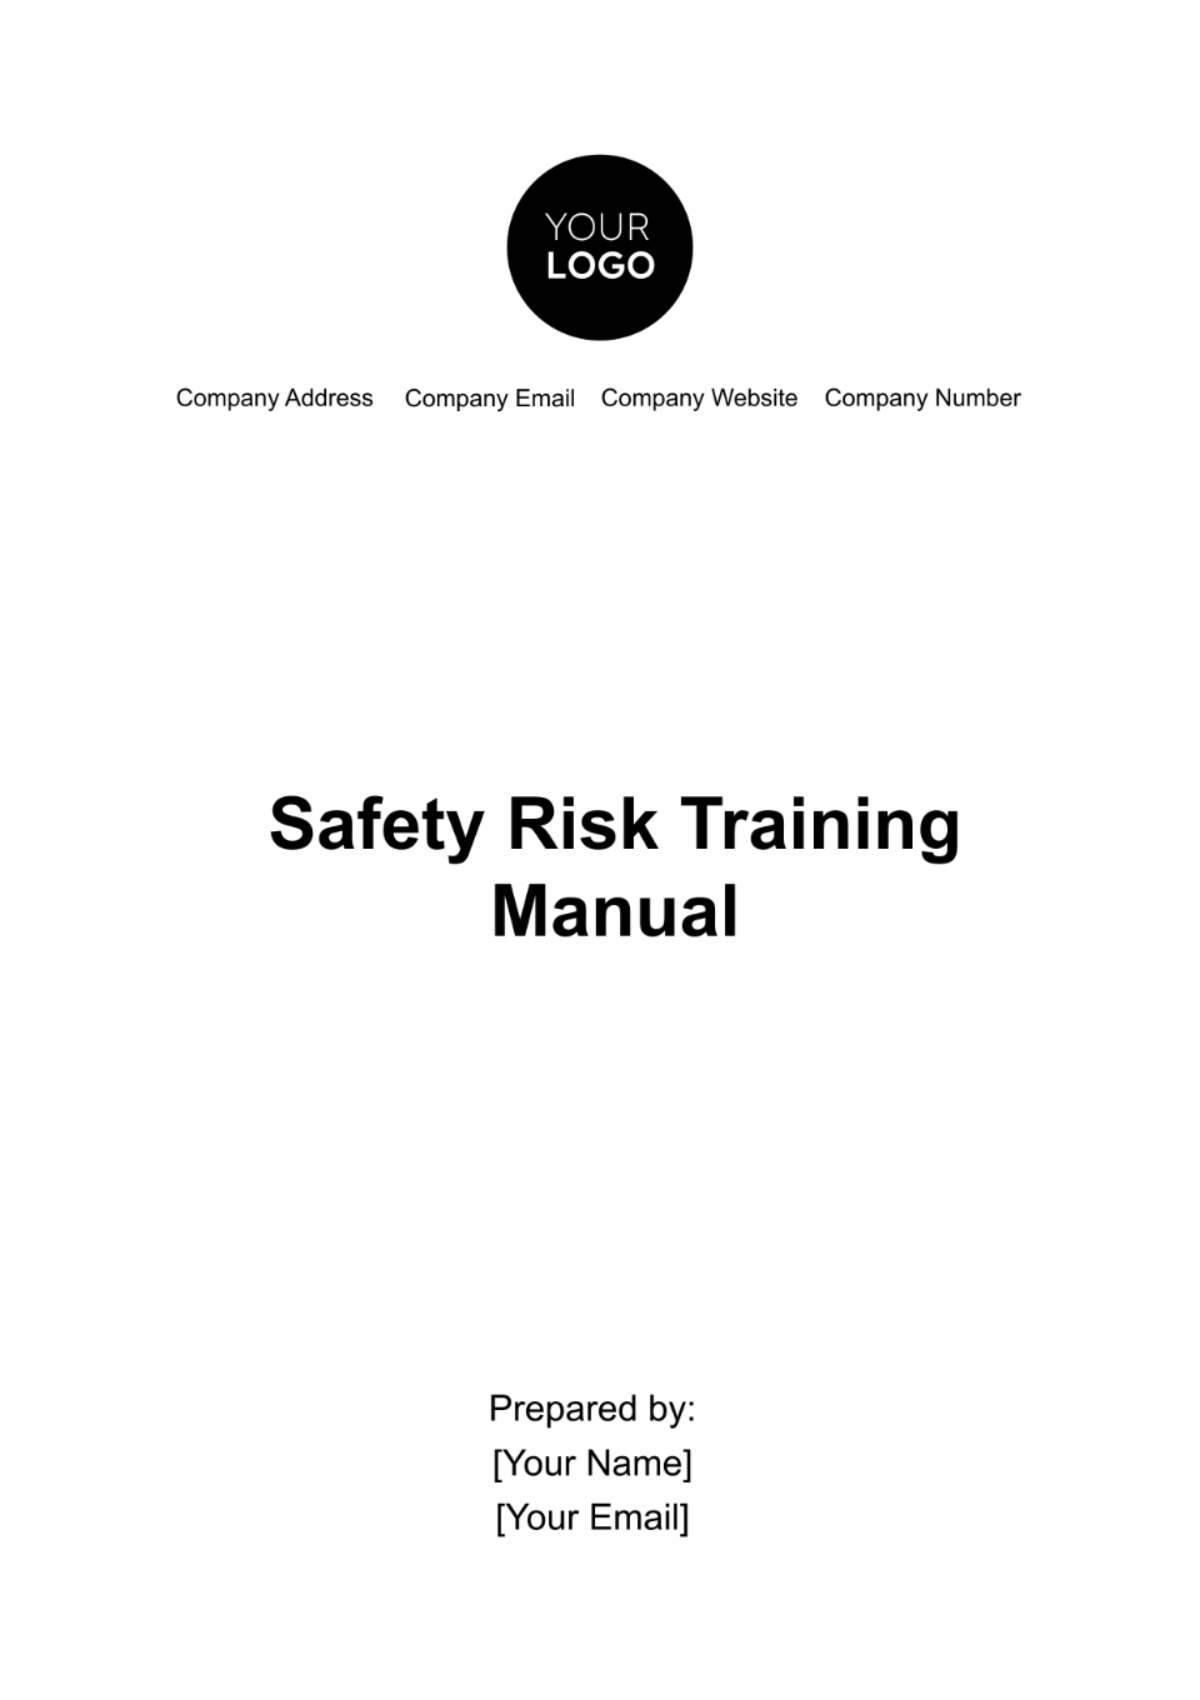 Safety Risk Training Manual Template